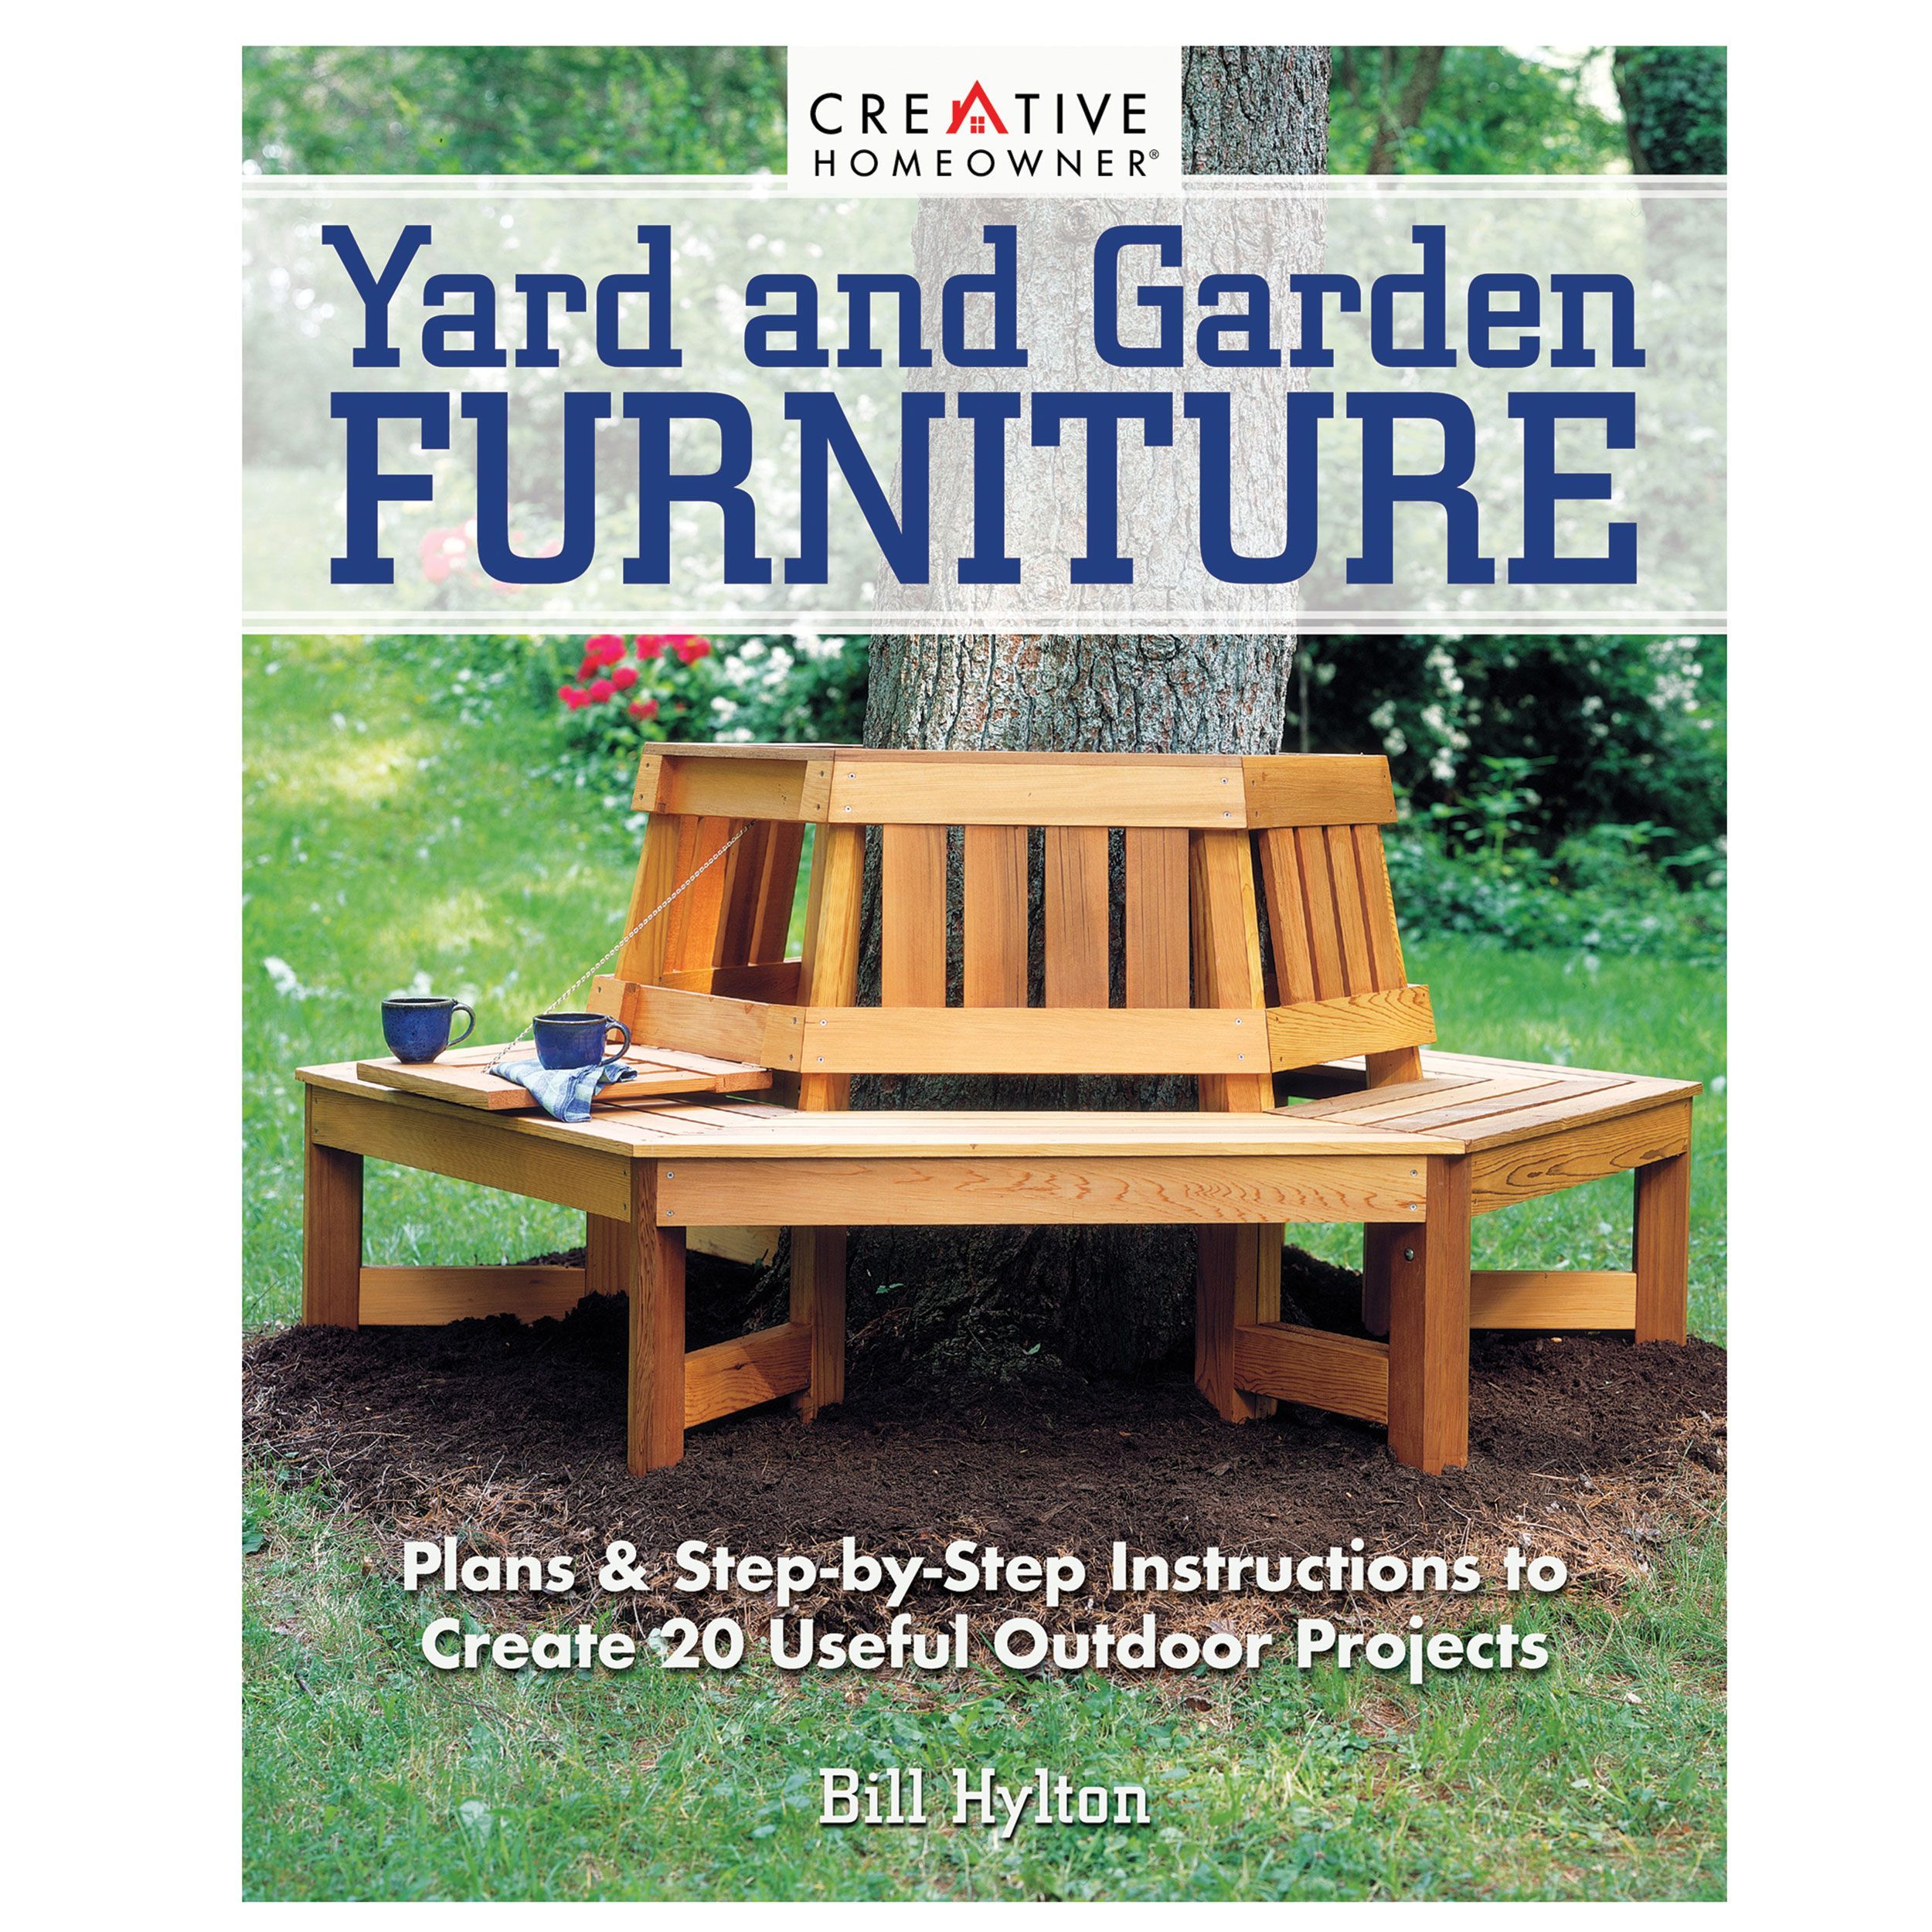 Yard and Garden Furniture, 2nd Edition -   17 diy projects for the home backyards ideas